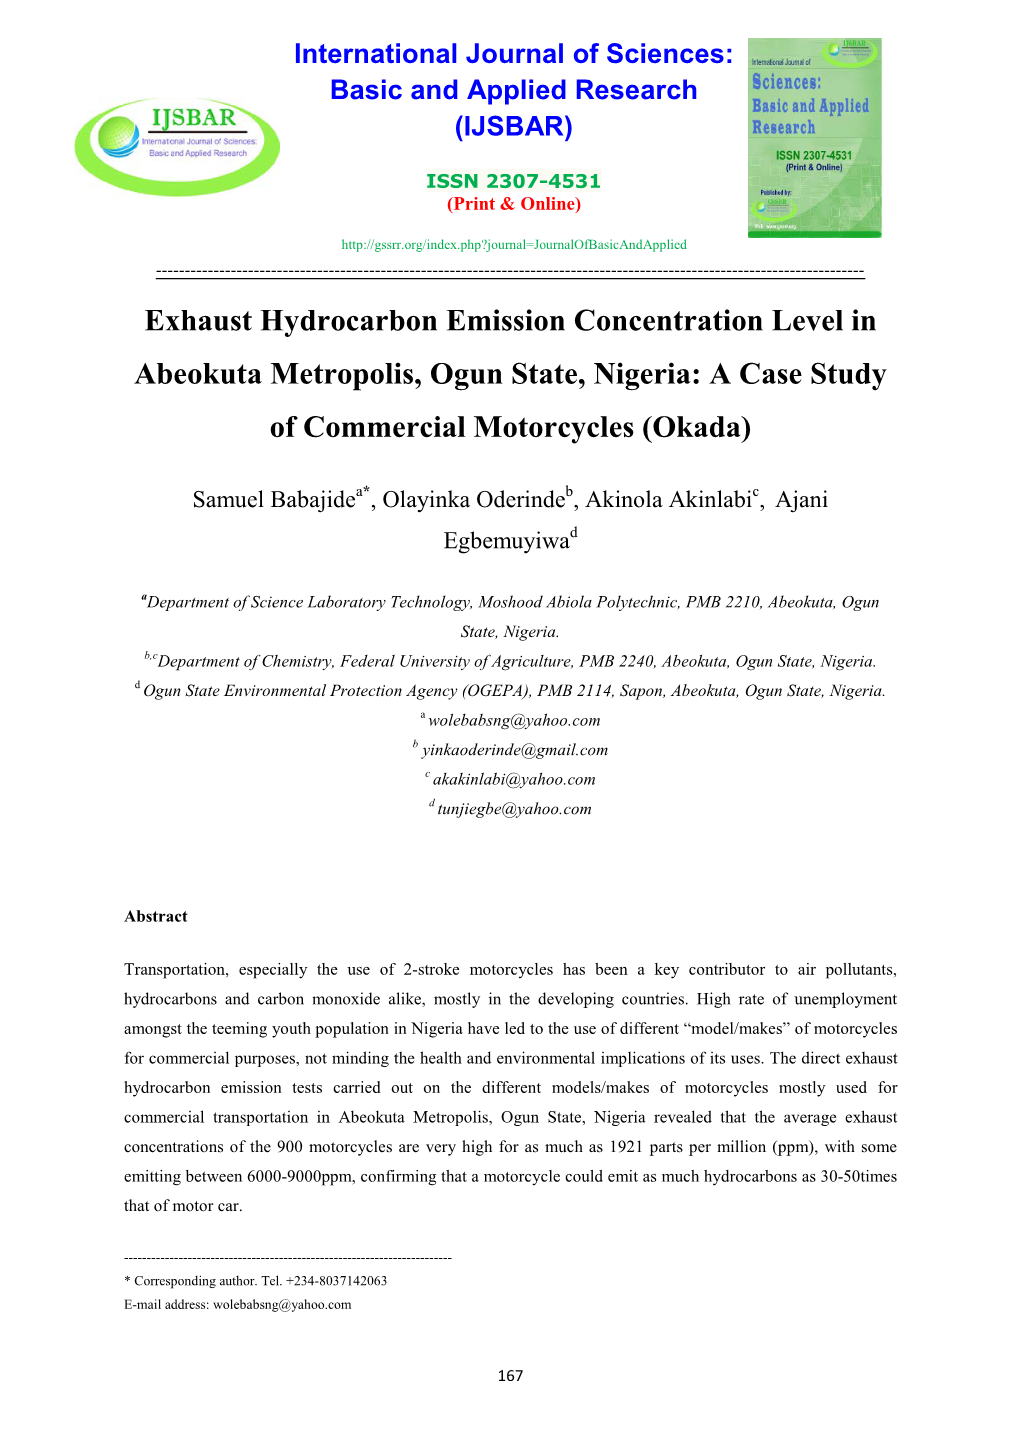 Exhaust Hydrocarbon Emission Concentration Level in Abeokuta Metropolis, Ogun State, Nigeria: a Case Study of Commercial Motorcycles (Okada)